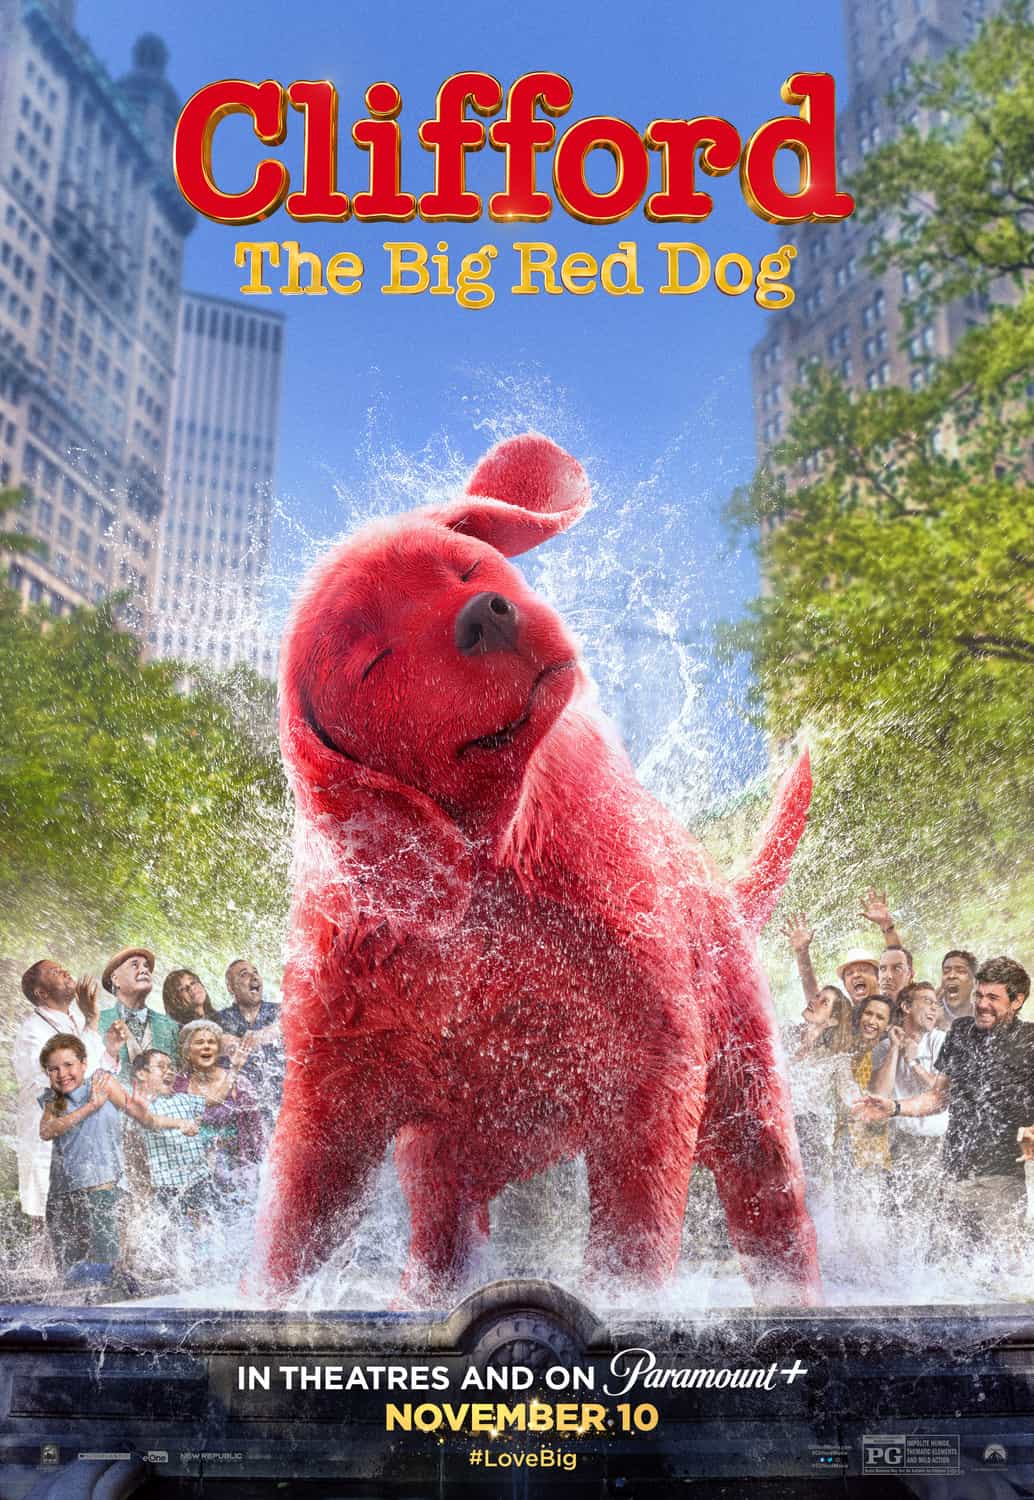 Clifford the Big Red Dog is given a PG age rating for mild bad language, violence